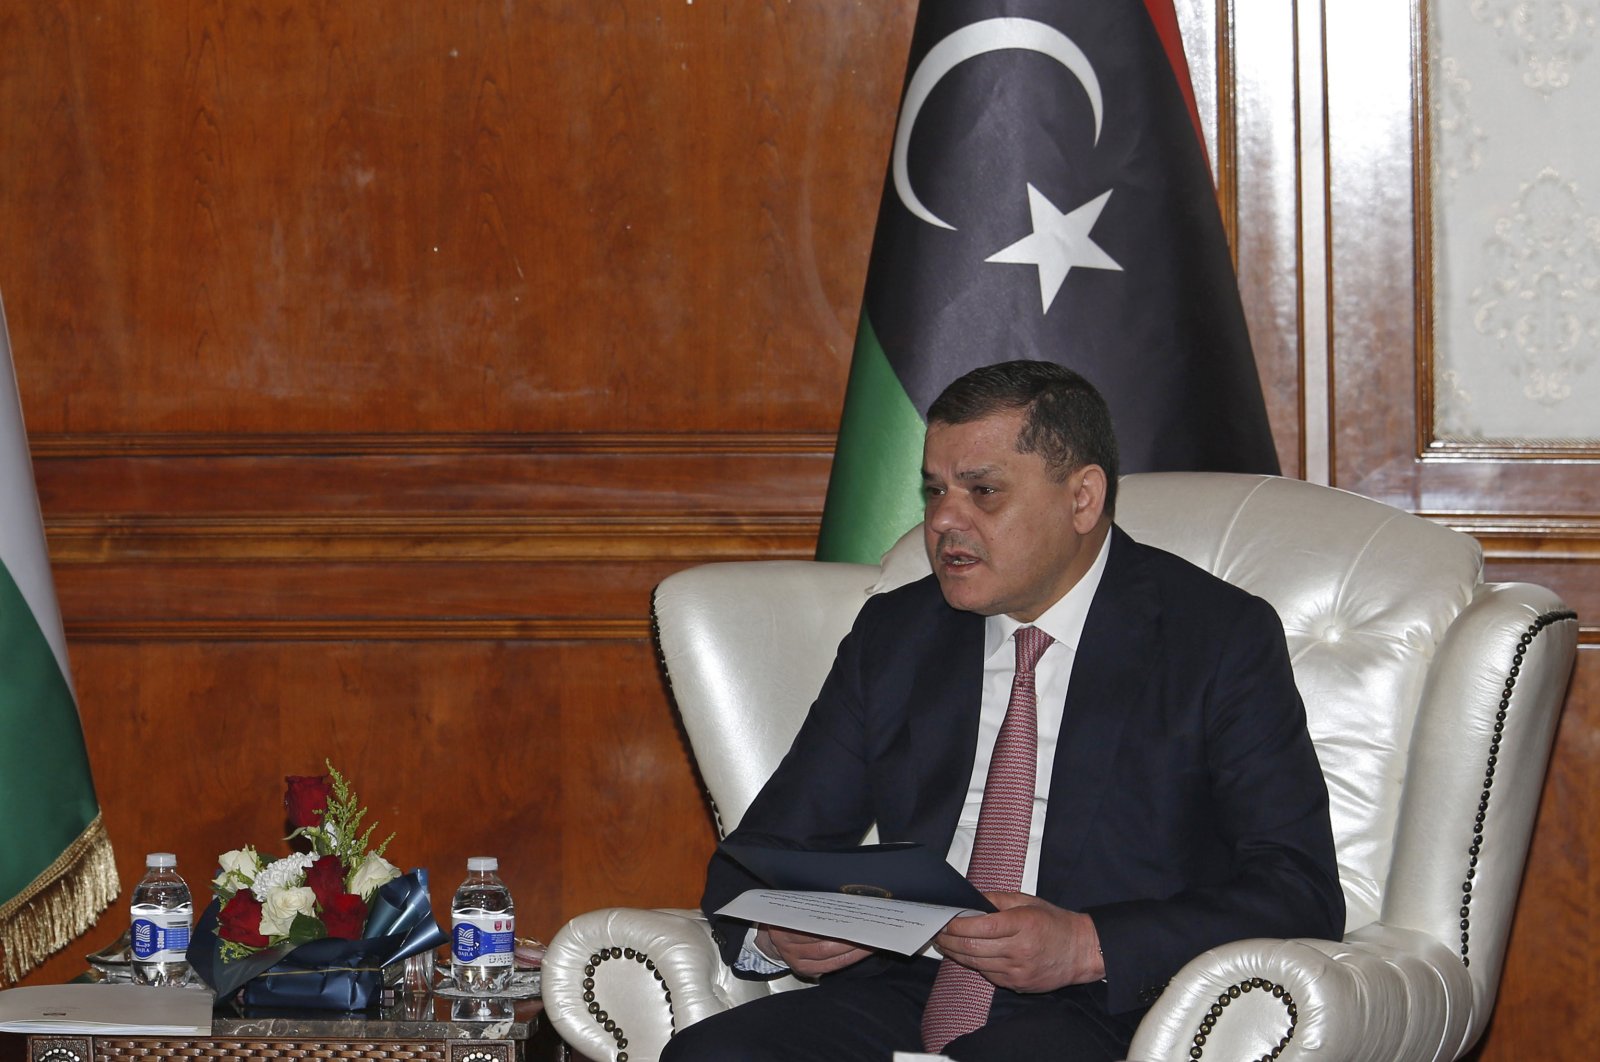 Prime Minister Dbeibah is running the summer elections in Libya in the middle of